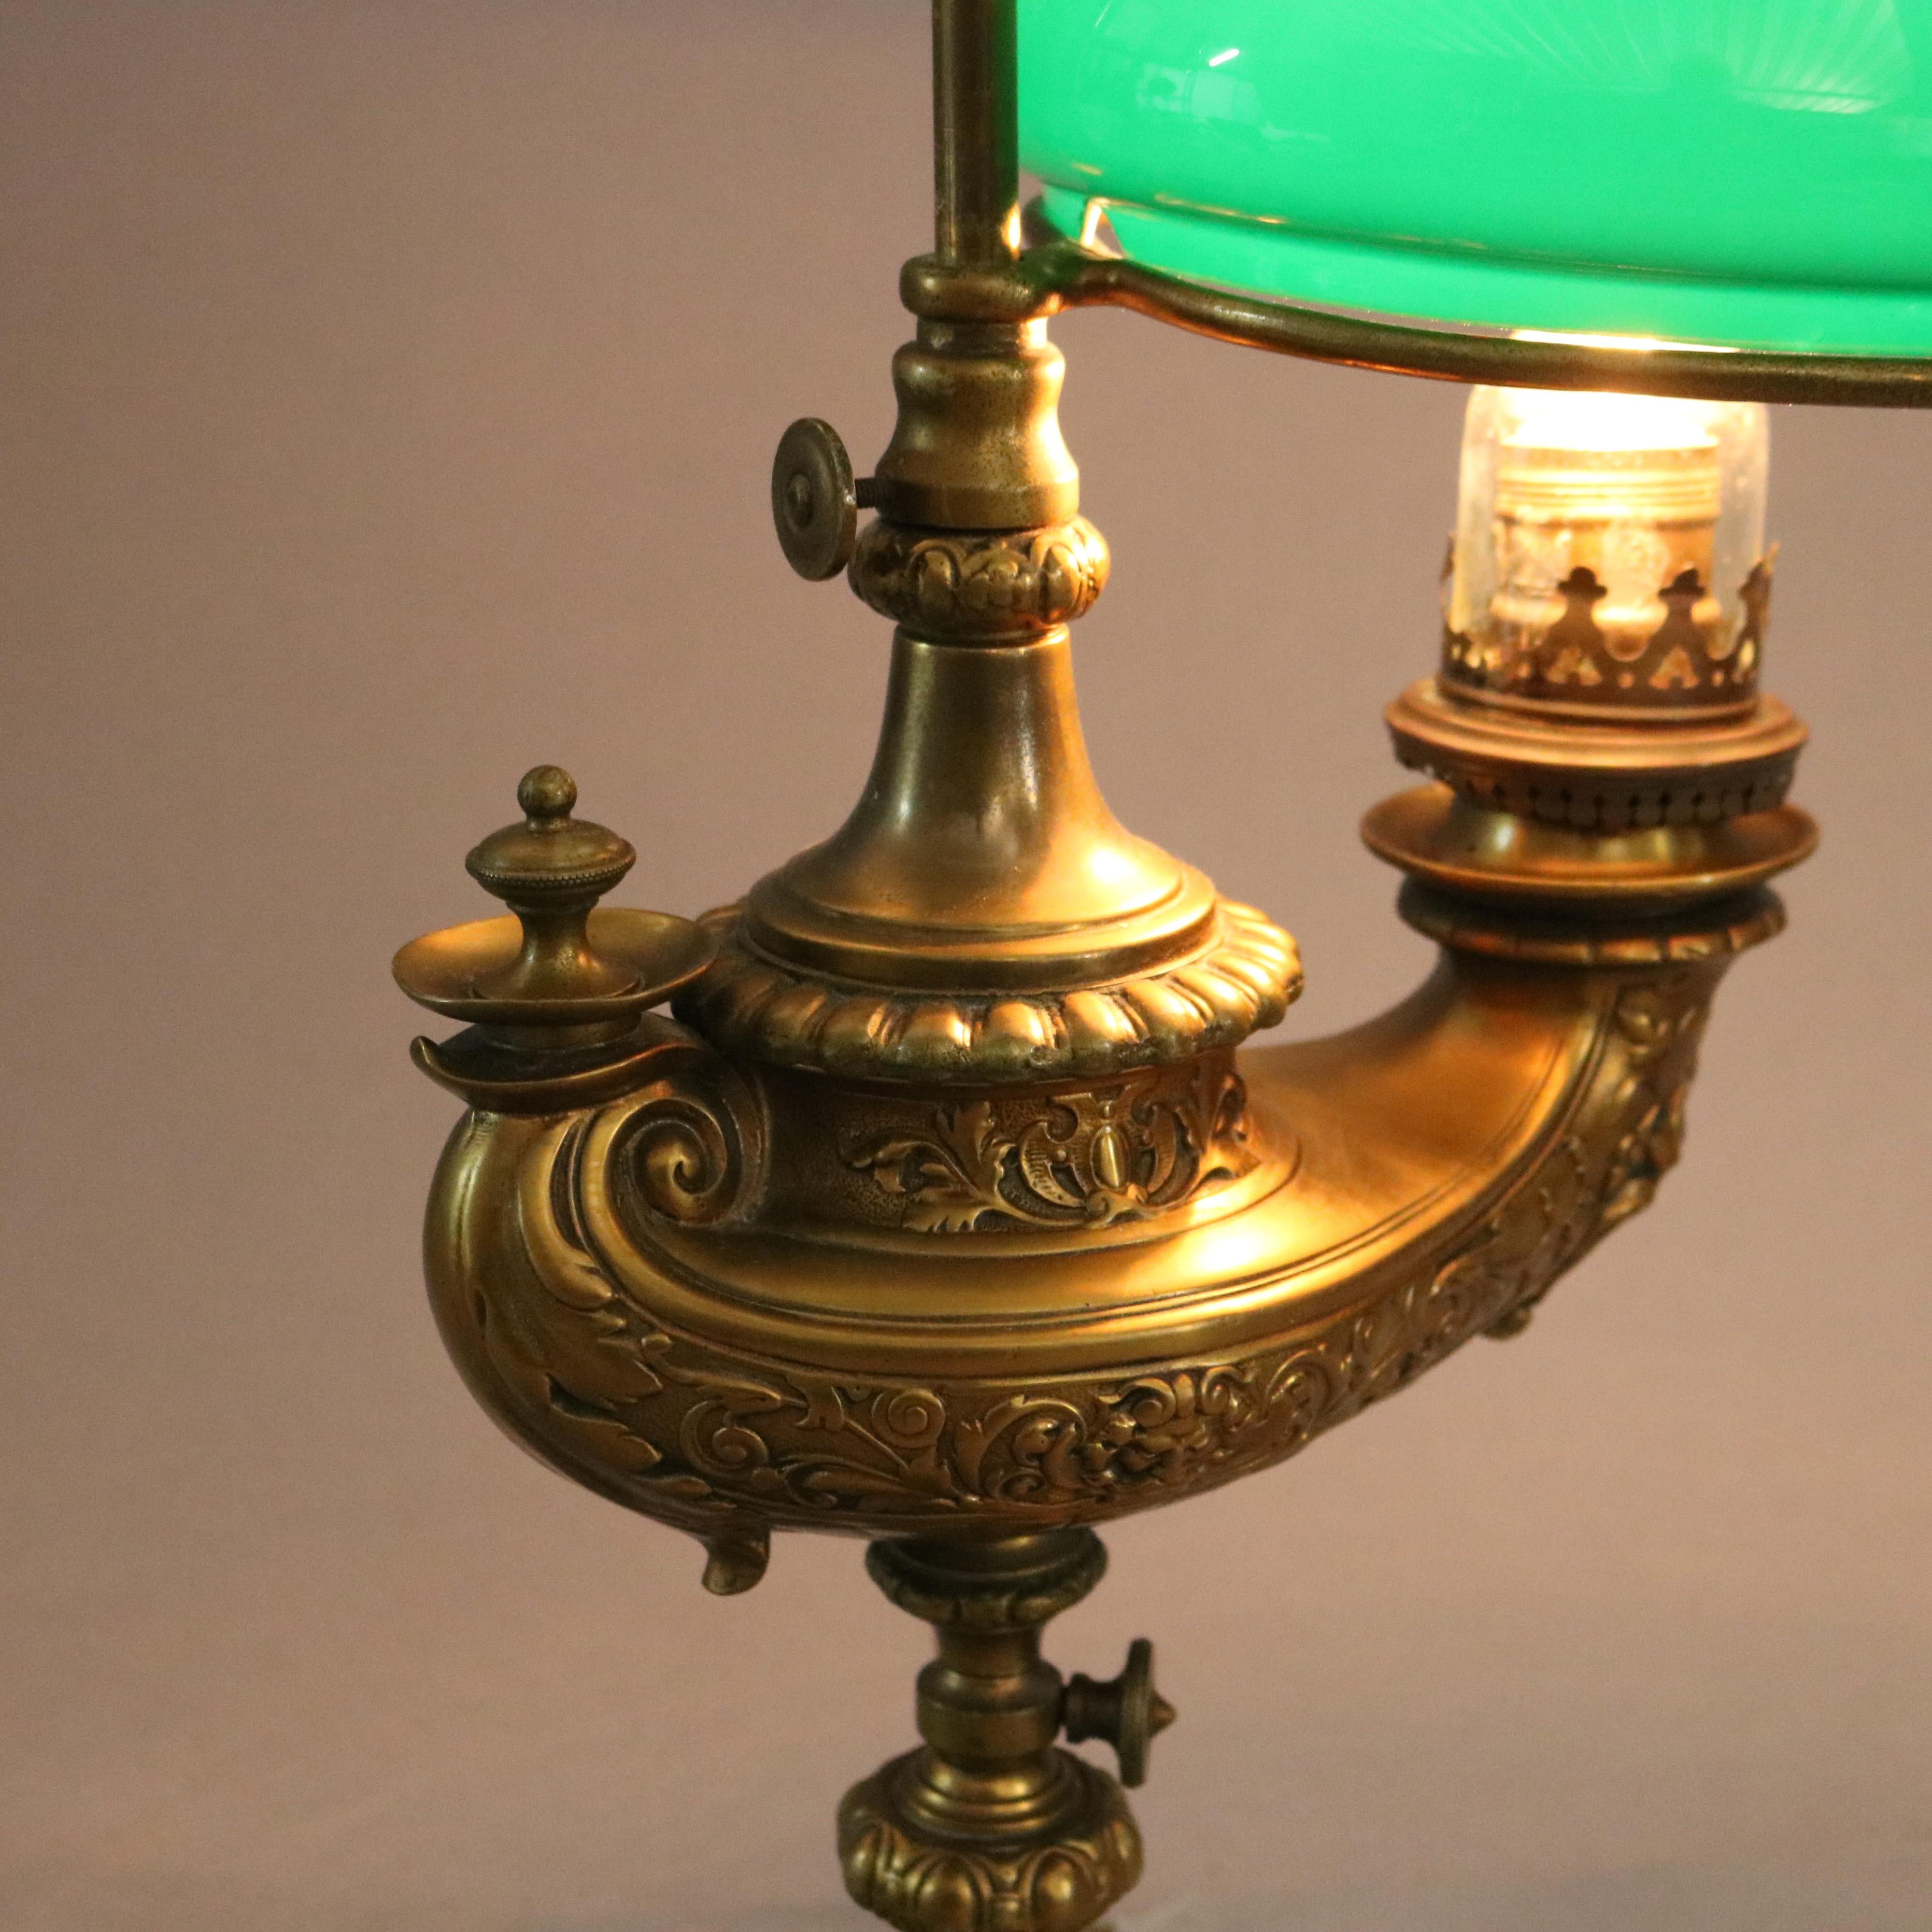 Antique Harvard Student Lamp with Emeralite Shade Alladin Lamp Form 19th Century 1